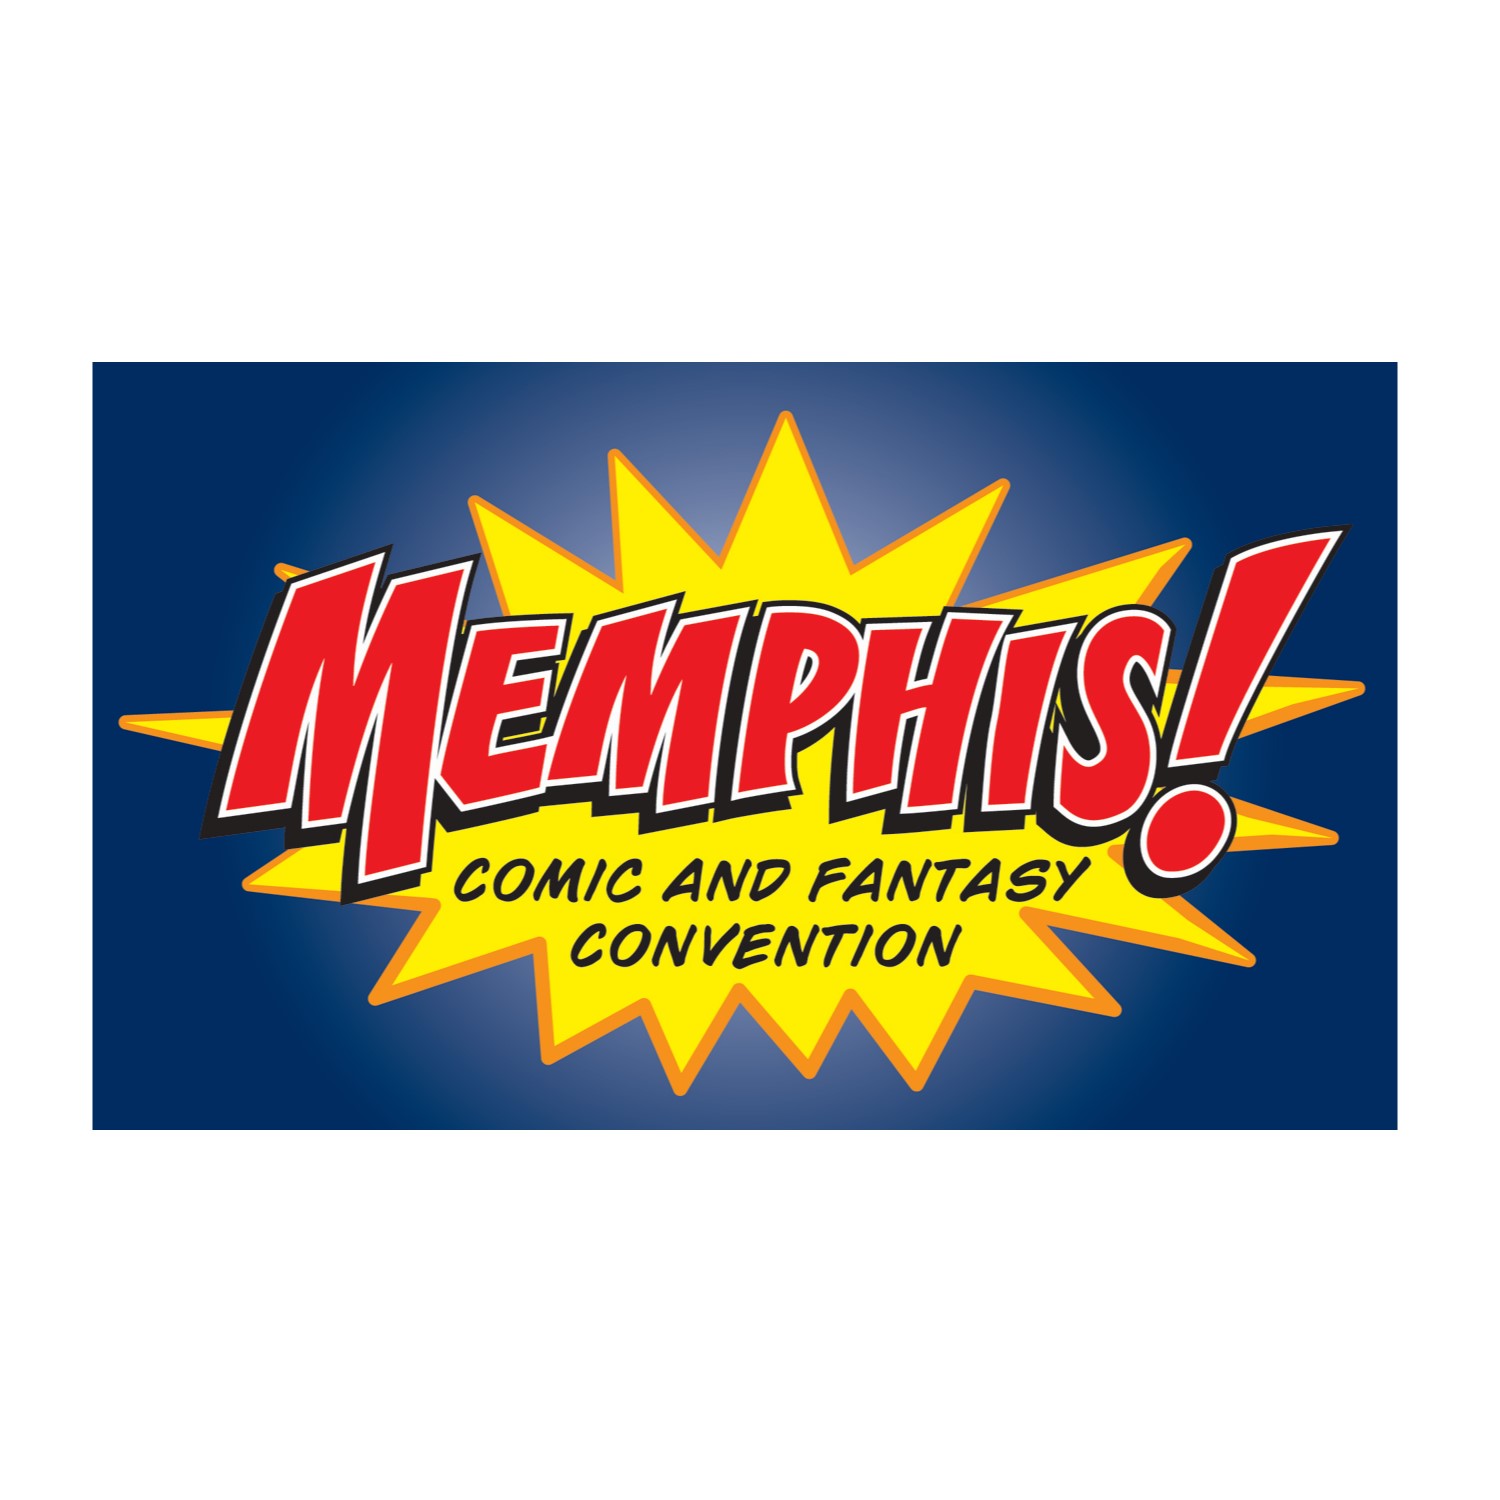 Memphis Comic and Fantasy Convention/Geek 101 Arts Education